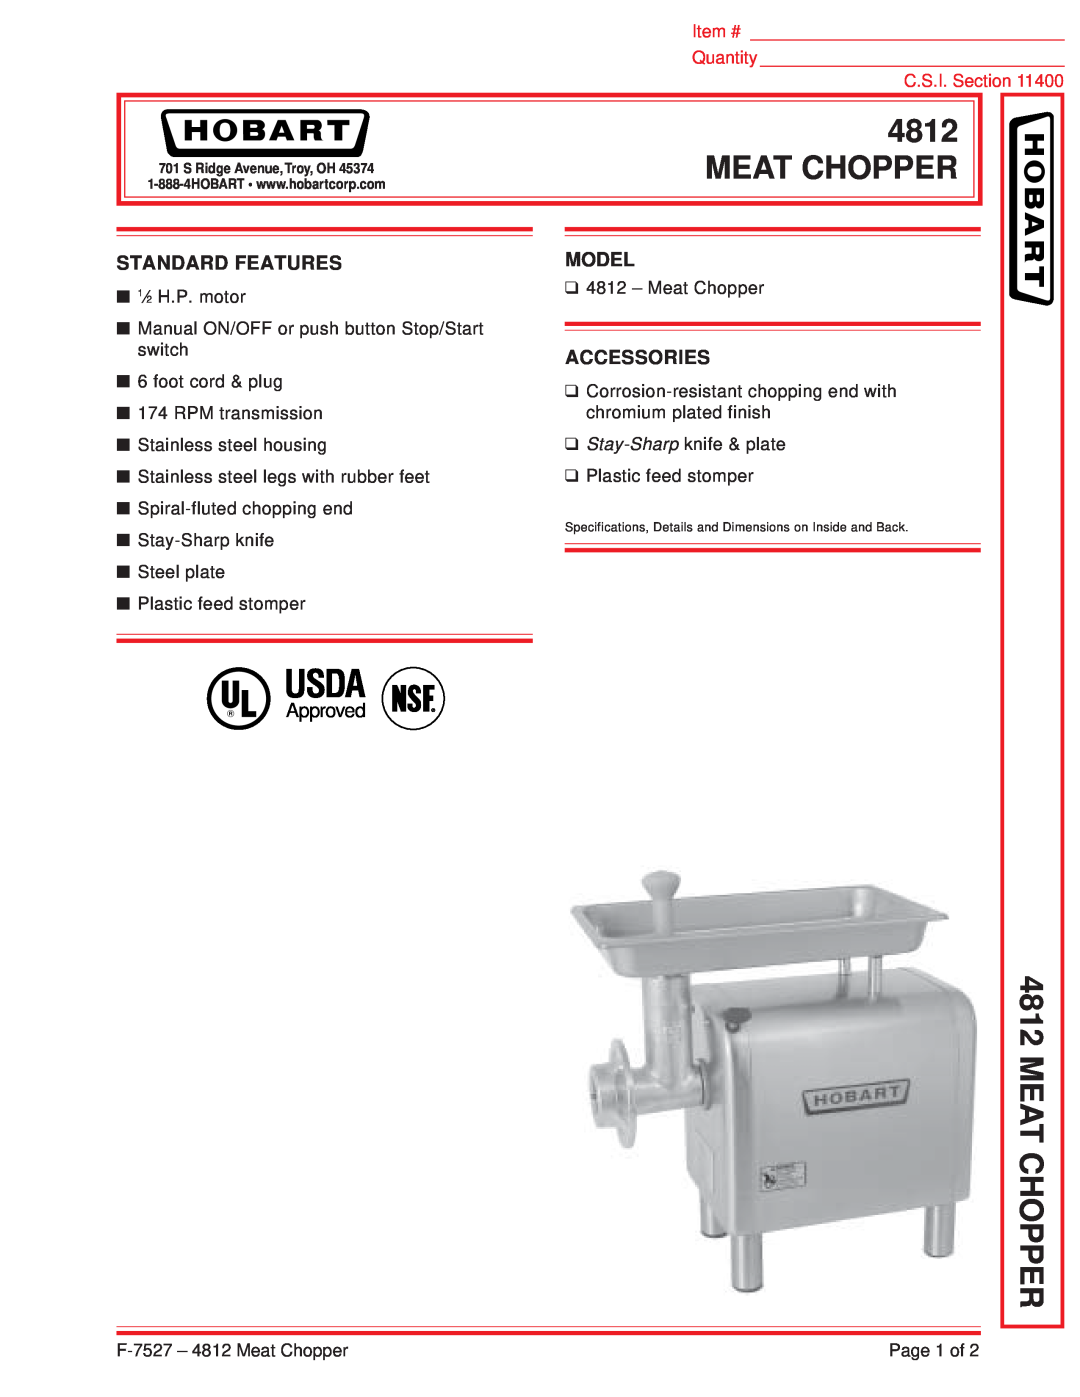 Hobart 4812 specifications Meat Chopper, Standard Features, Model, Accessories, Usda, RApproved, Item #, Quantity 